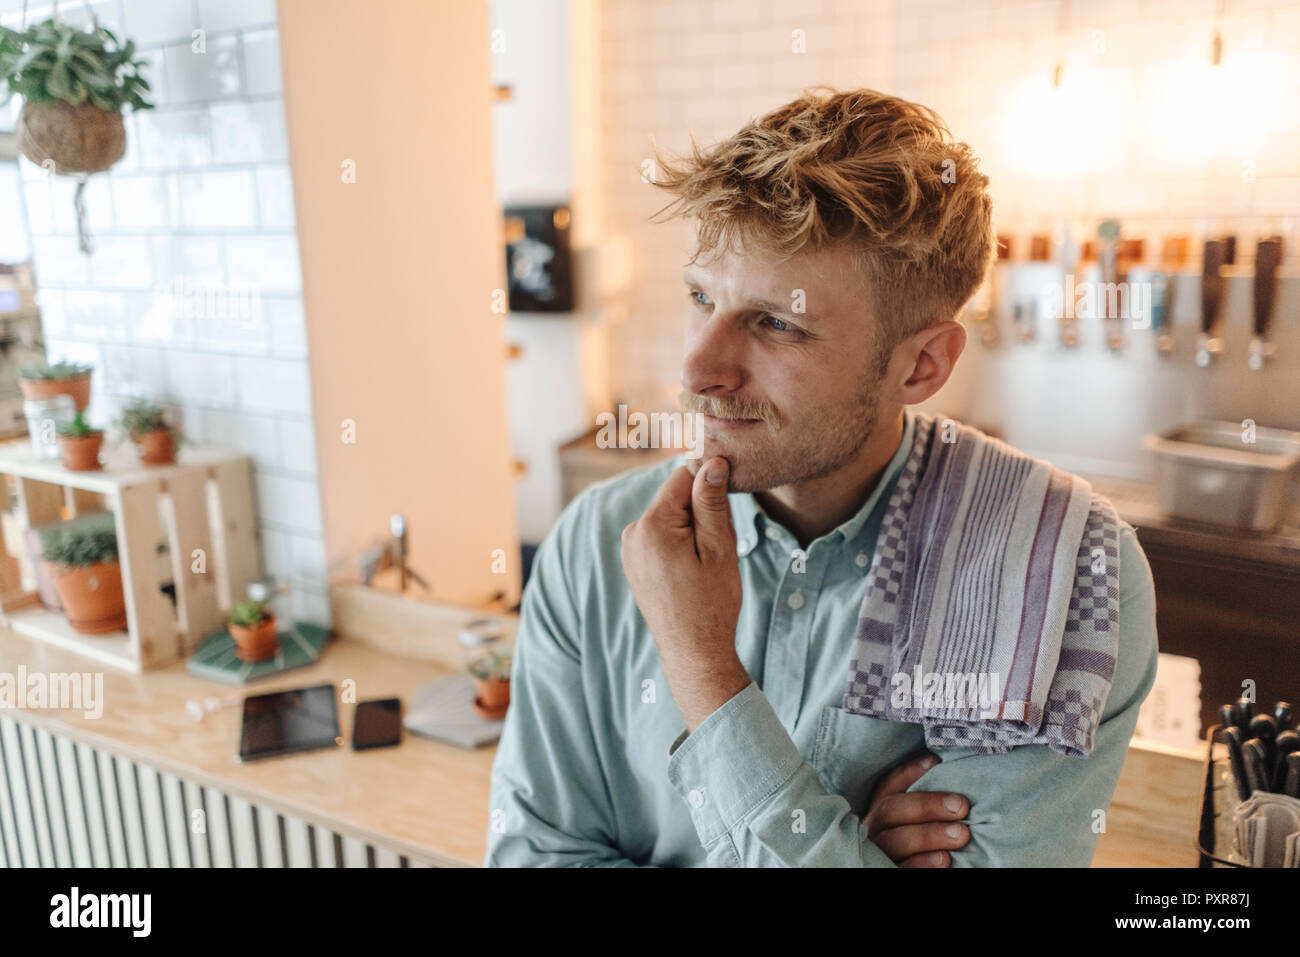 Young man working in his start-up cafe, thinking Stock Photo